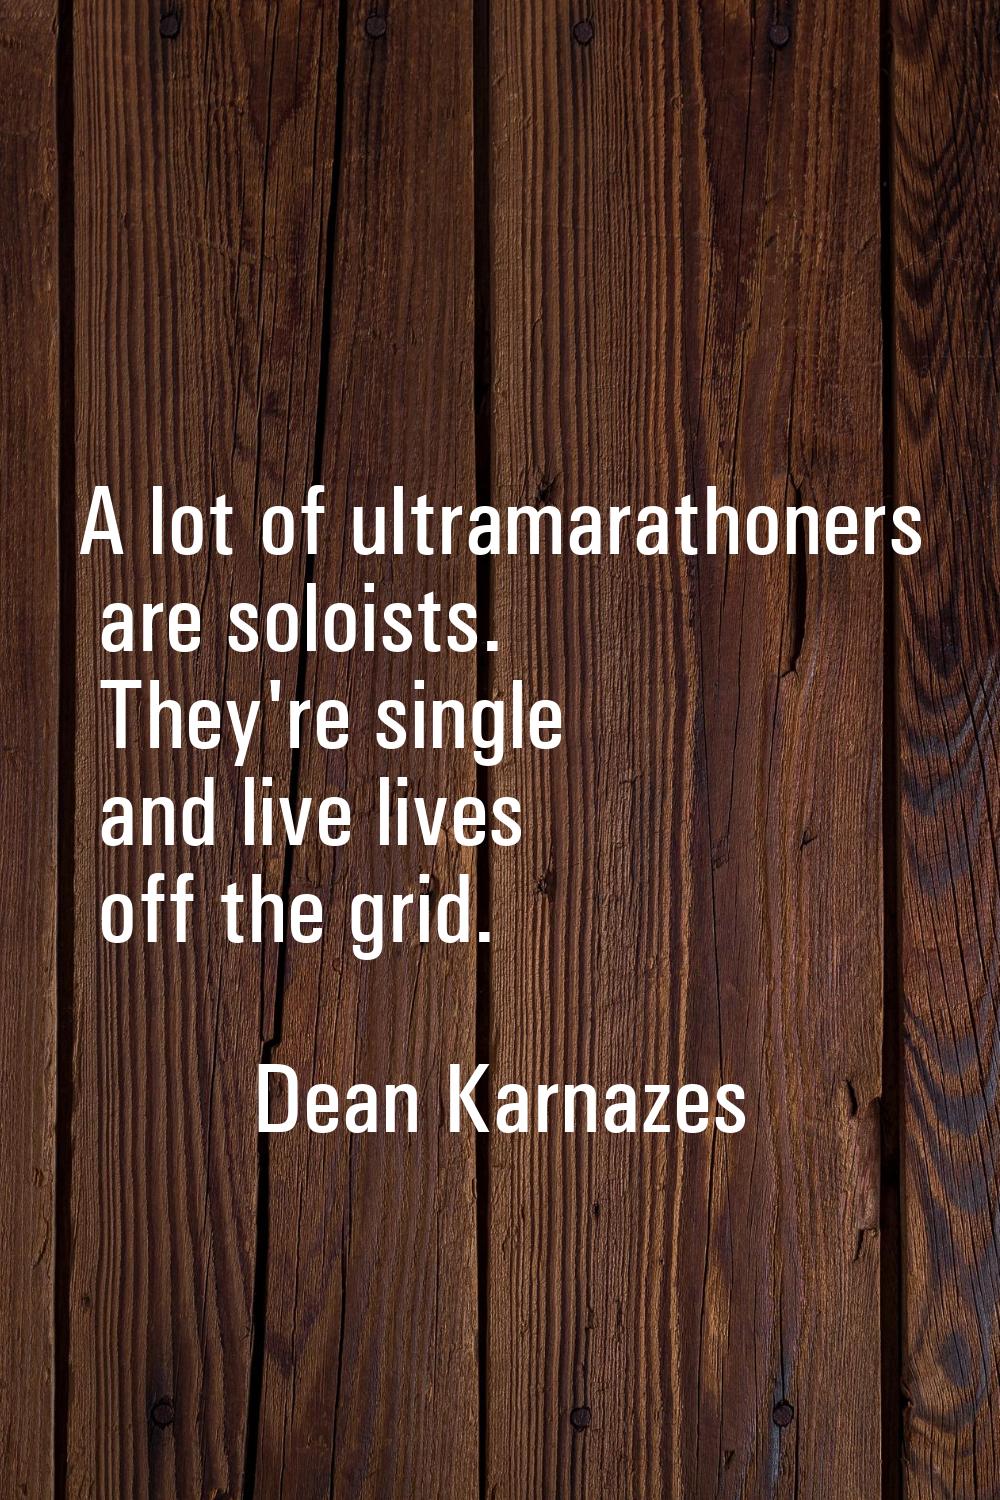 A lot of ultramarathoners are soloists. They're single and live lives off the grid.